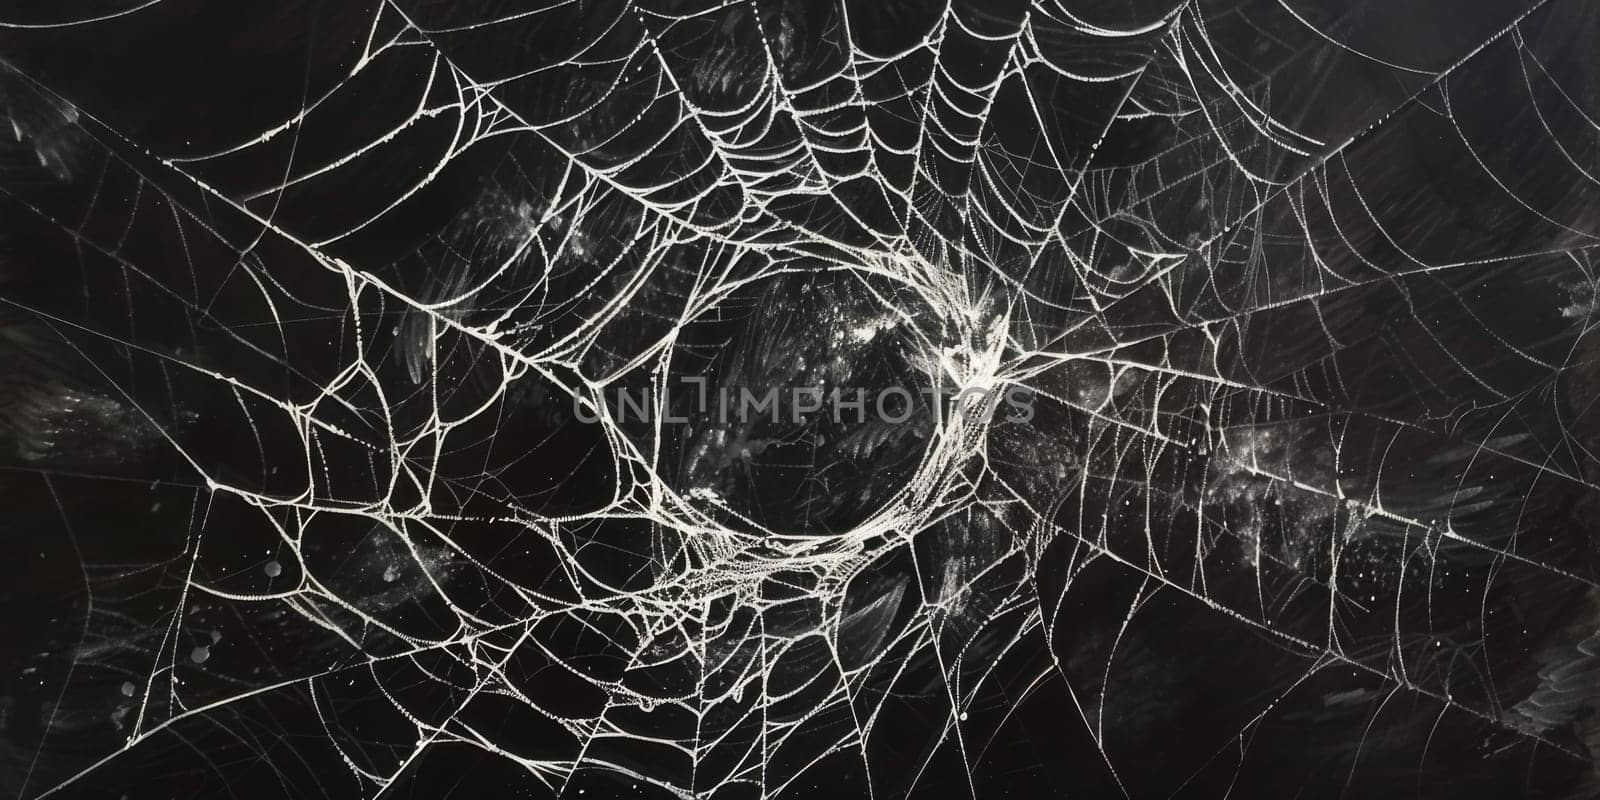 Spider's web, capturing every thread and intersection